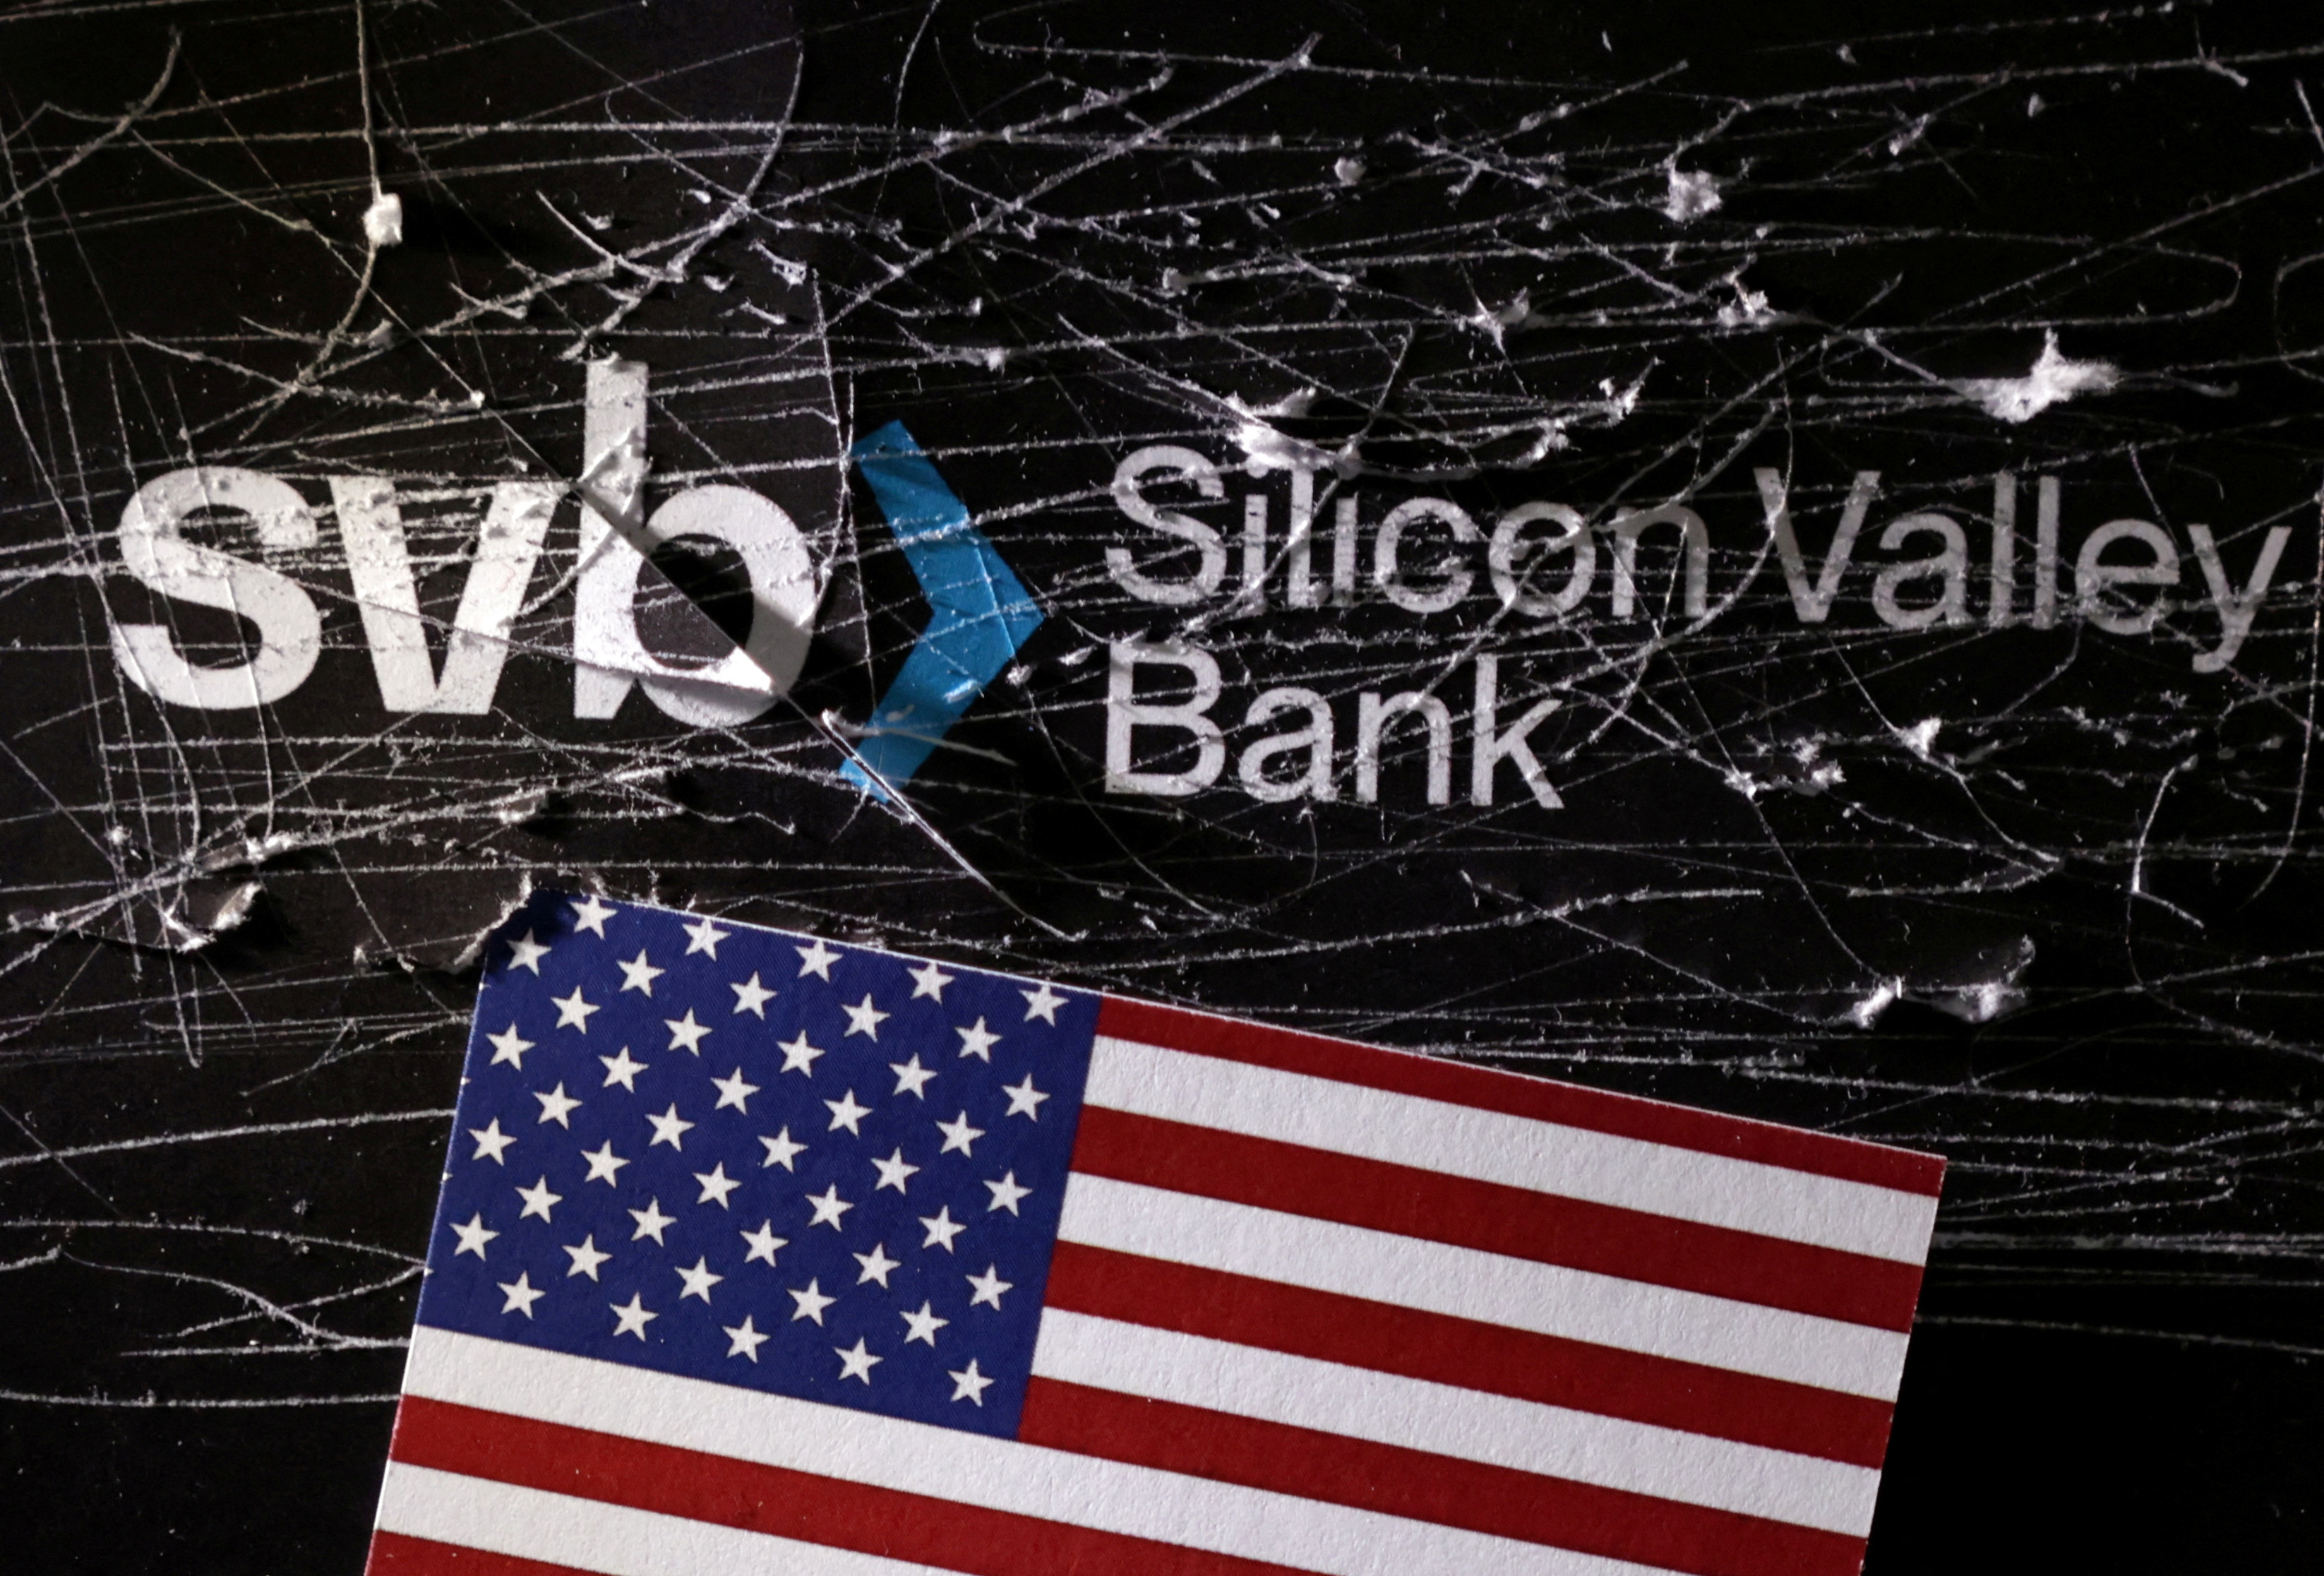 First Citizens in talks to acquire Silicon Valley Bank - Bloomberg News